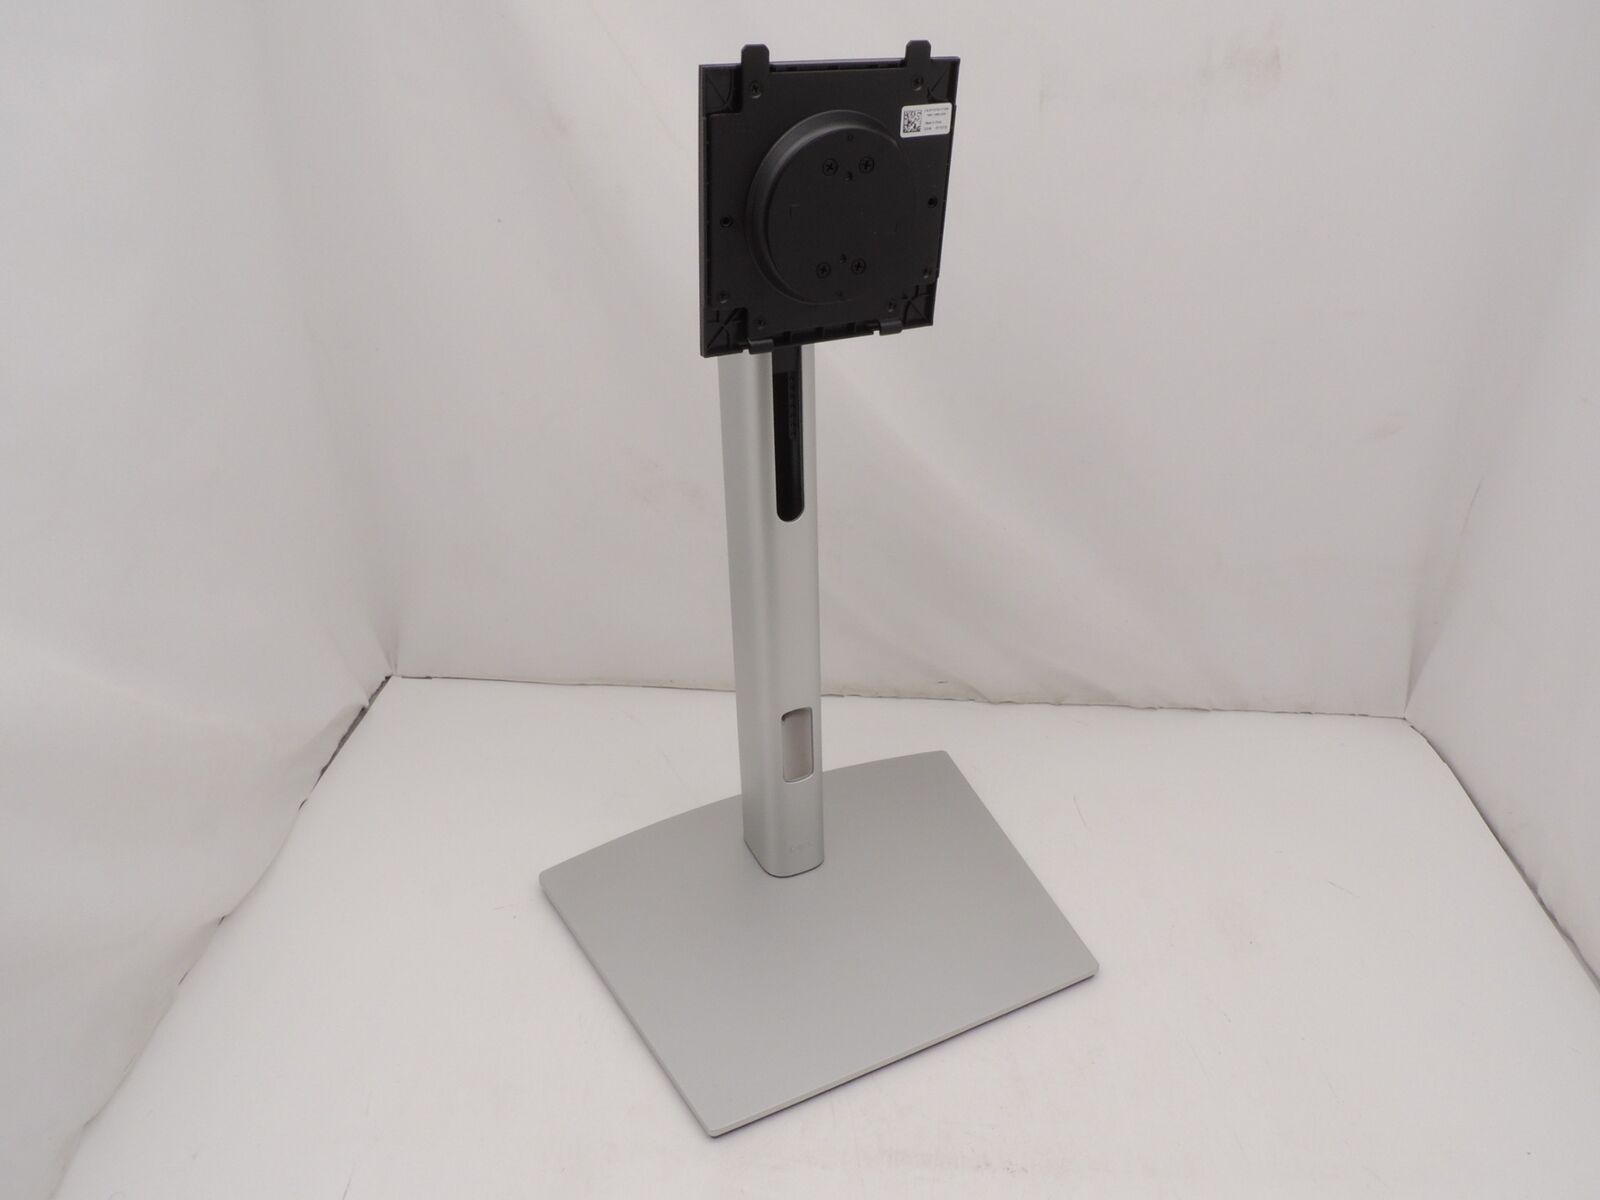 New Dell FFT-ZS 0Y10TG Adjustable Stand Base For P3221D 32